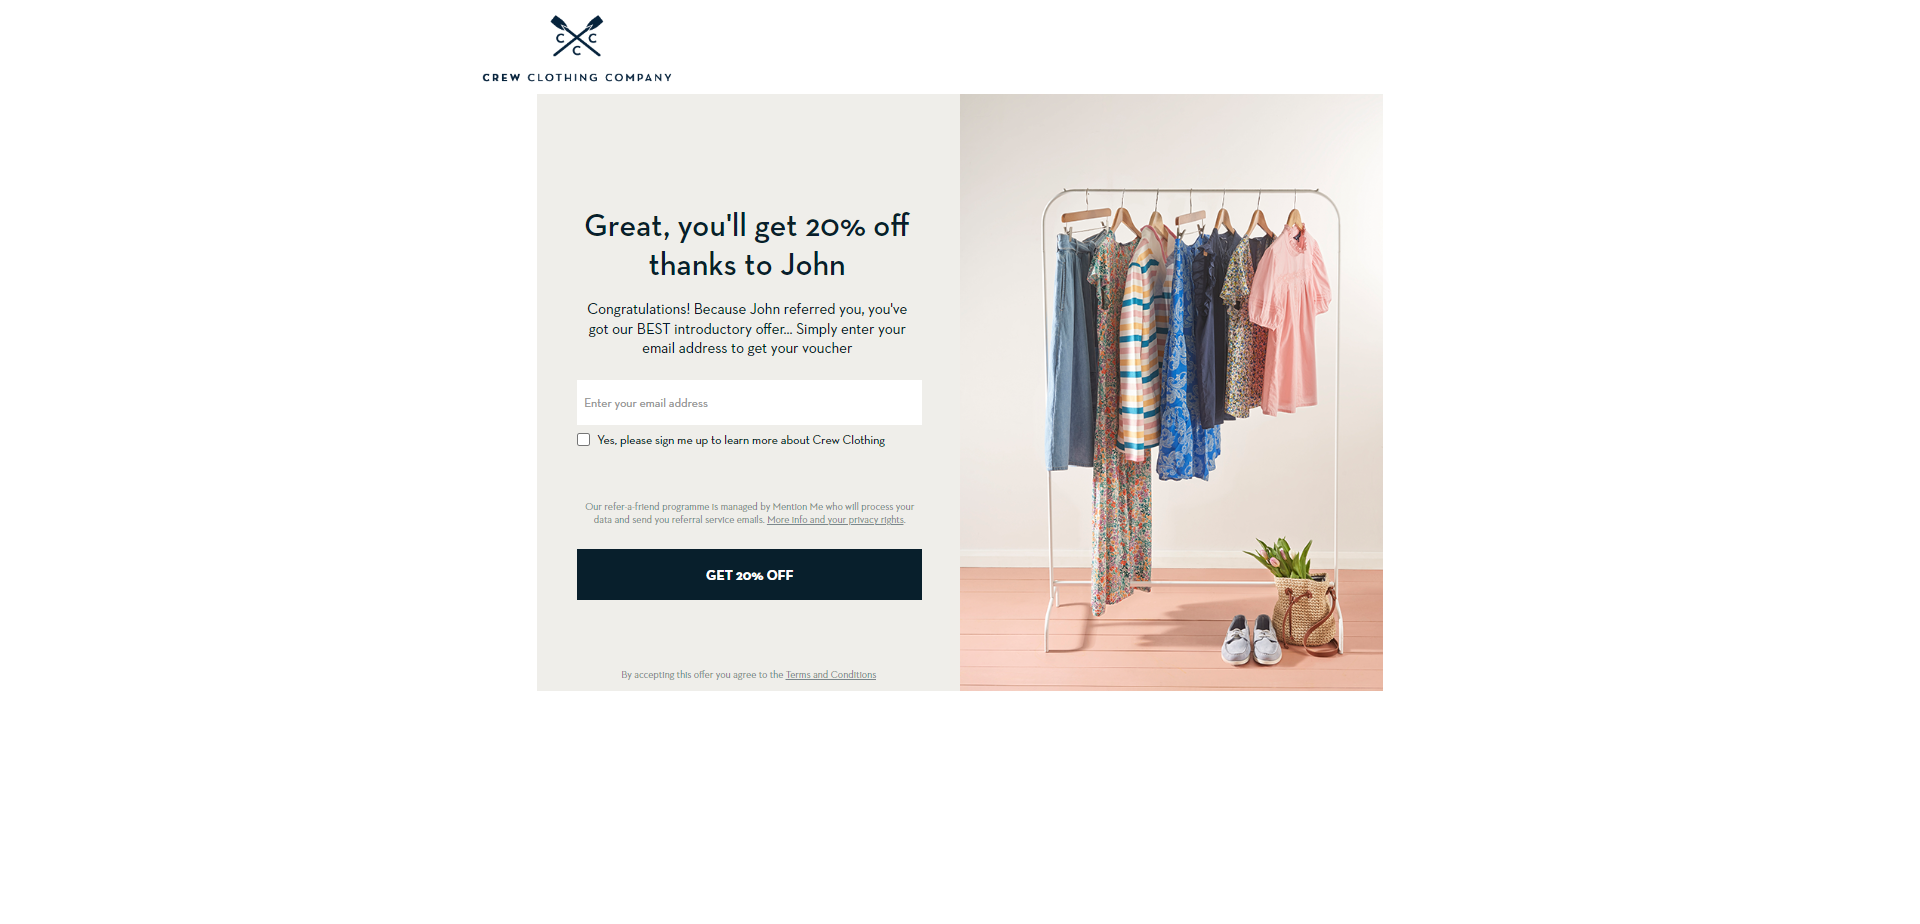 Referral Landing Page for Crew Clothing